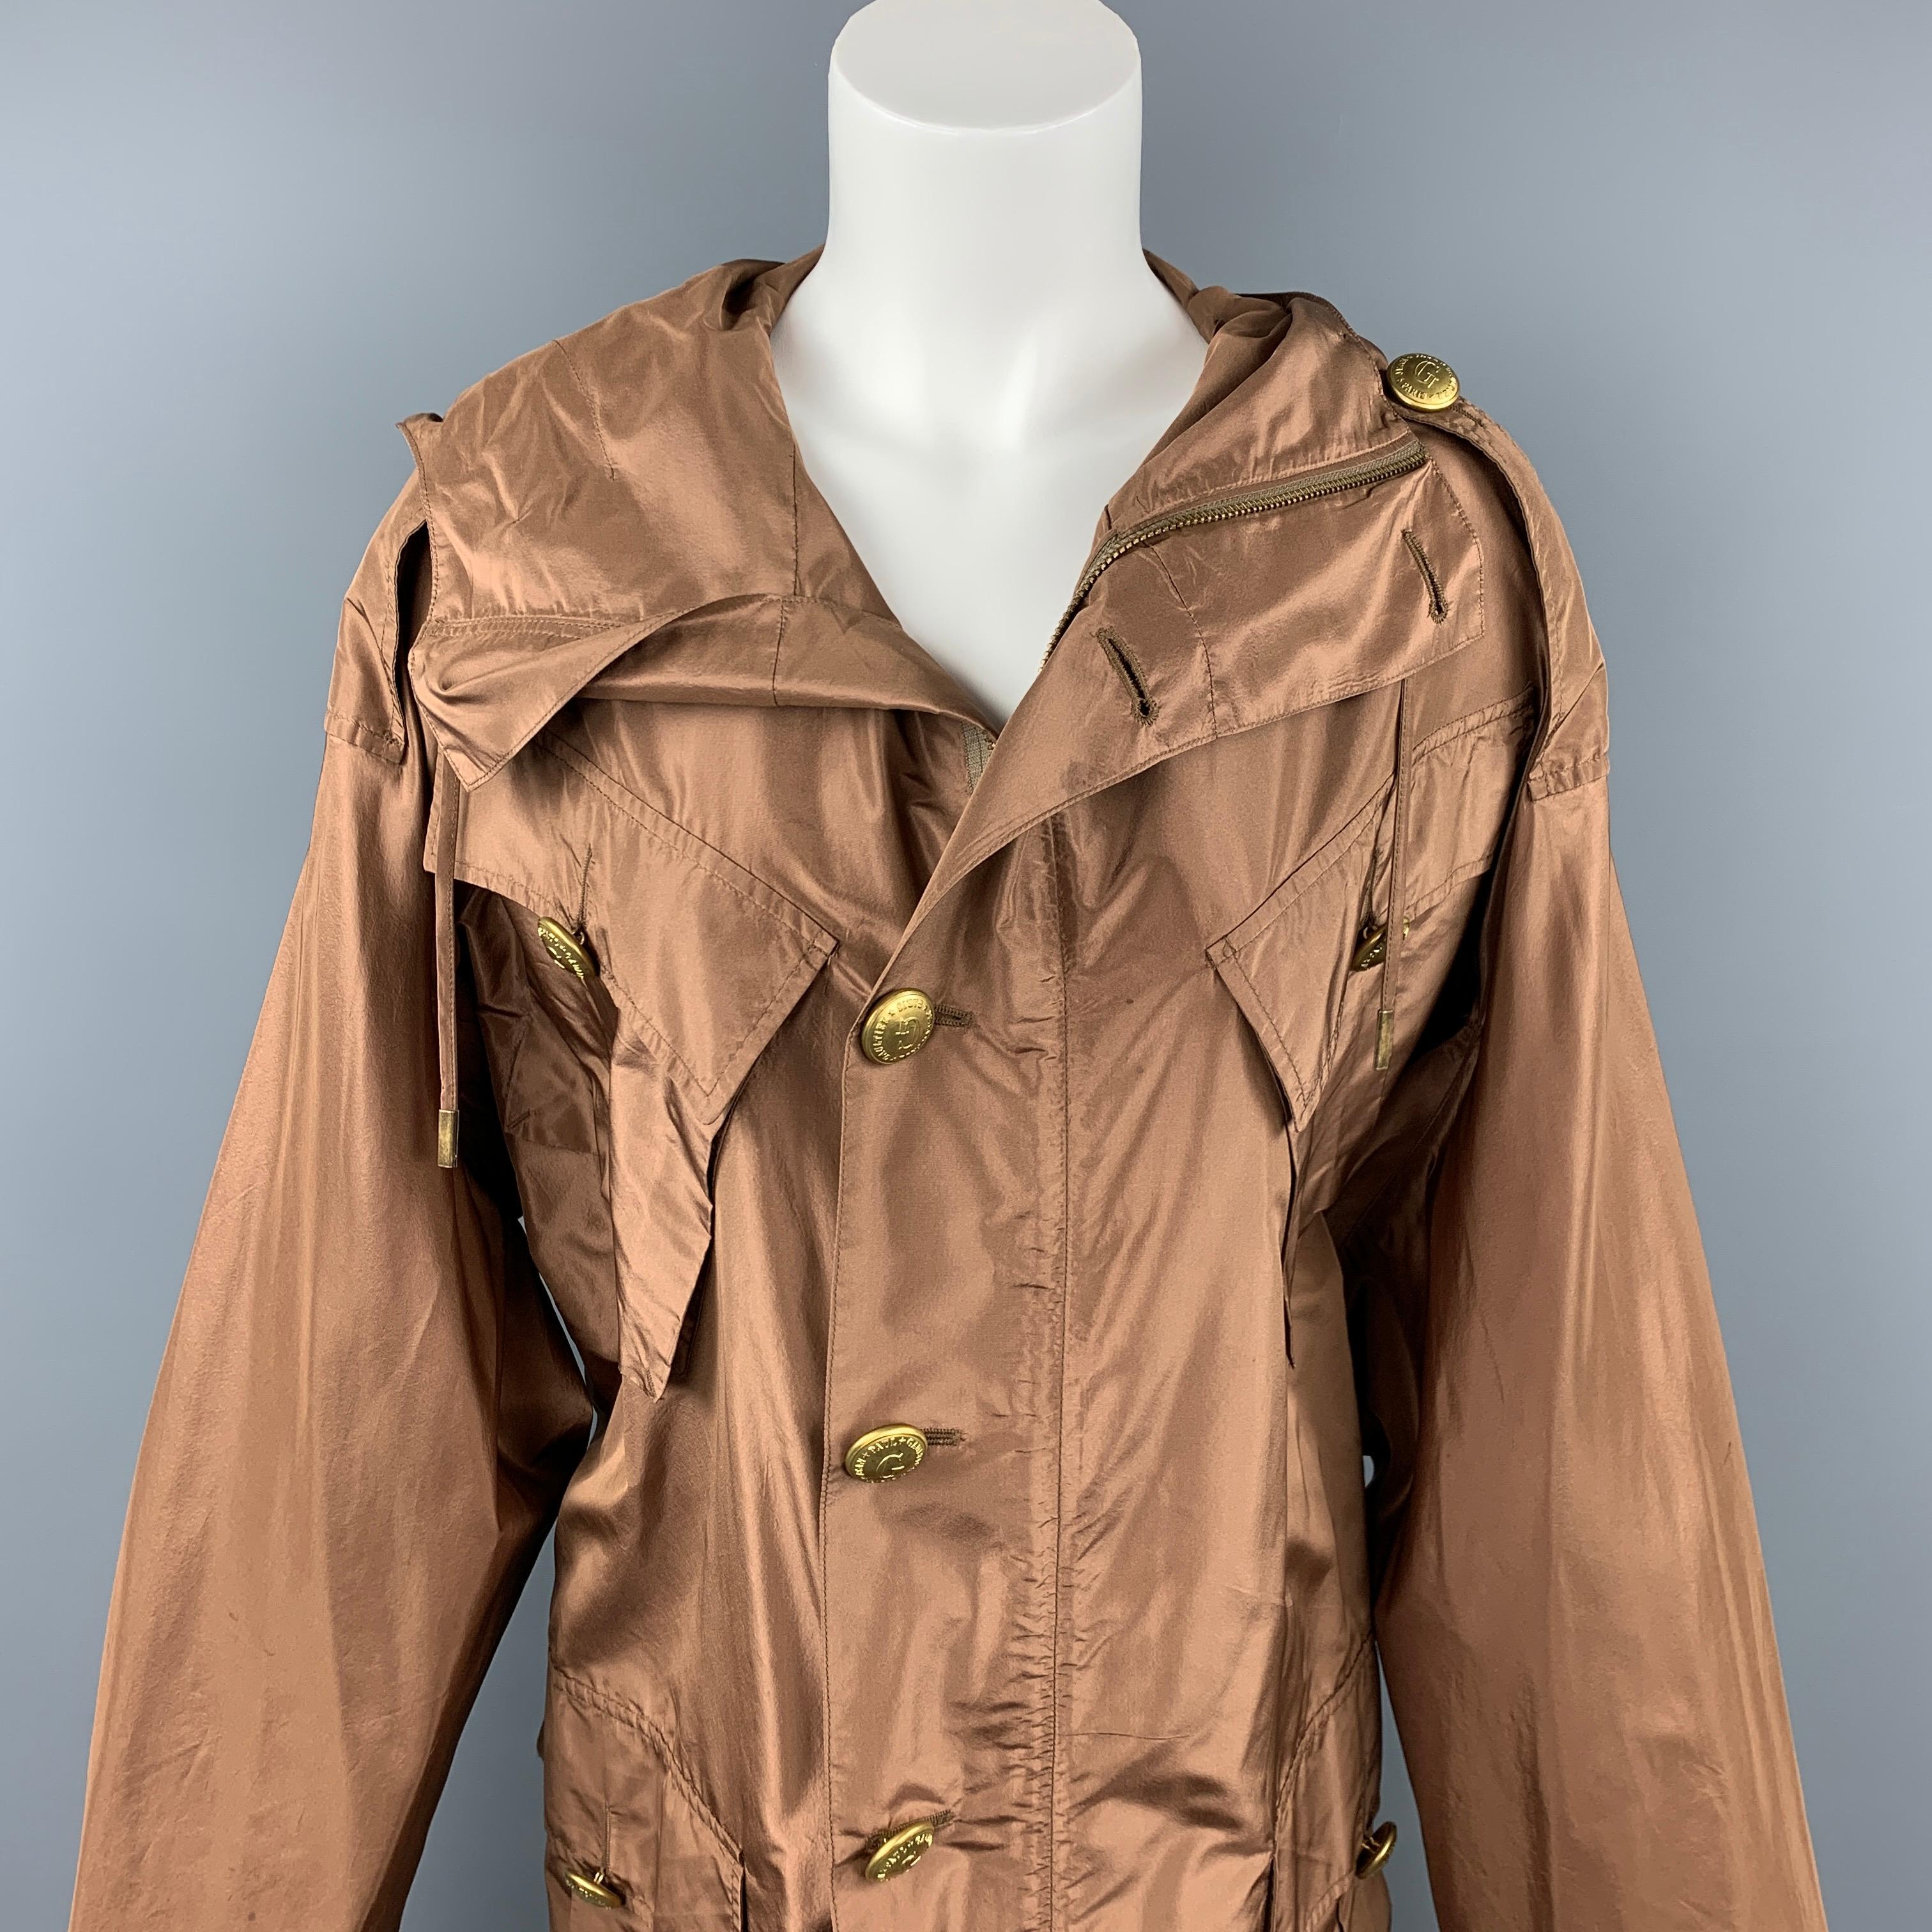 JEAN PAUL GAULTIER jacket comes in a copper silk featuring a hooded style, elastic waistband, oversized fit, epaulettes, patch pockets, and a brass button closure. Missing two buttons. As-Is. Made in Italy. 

Good Pre-Owned Condition.
Marked: I 40 /